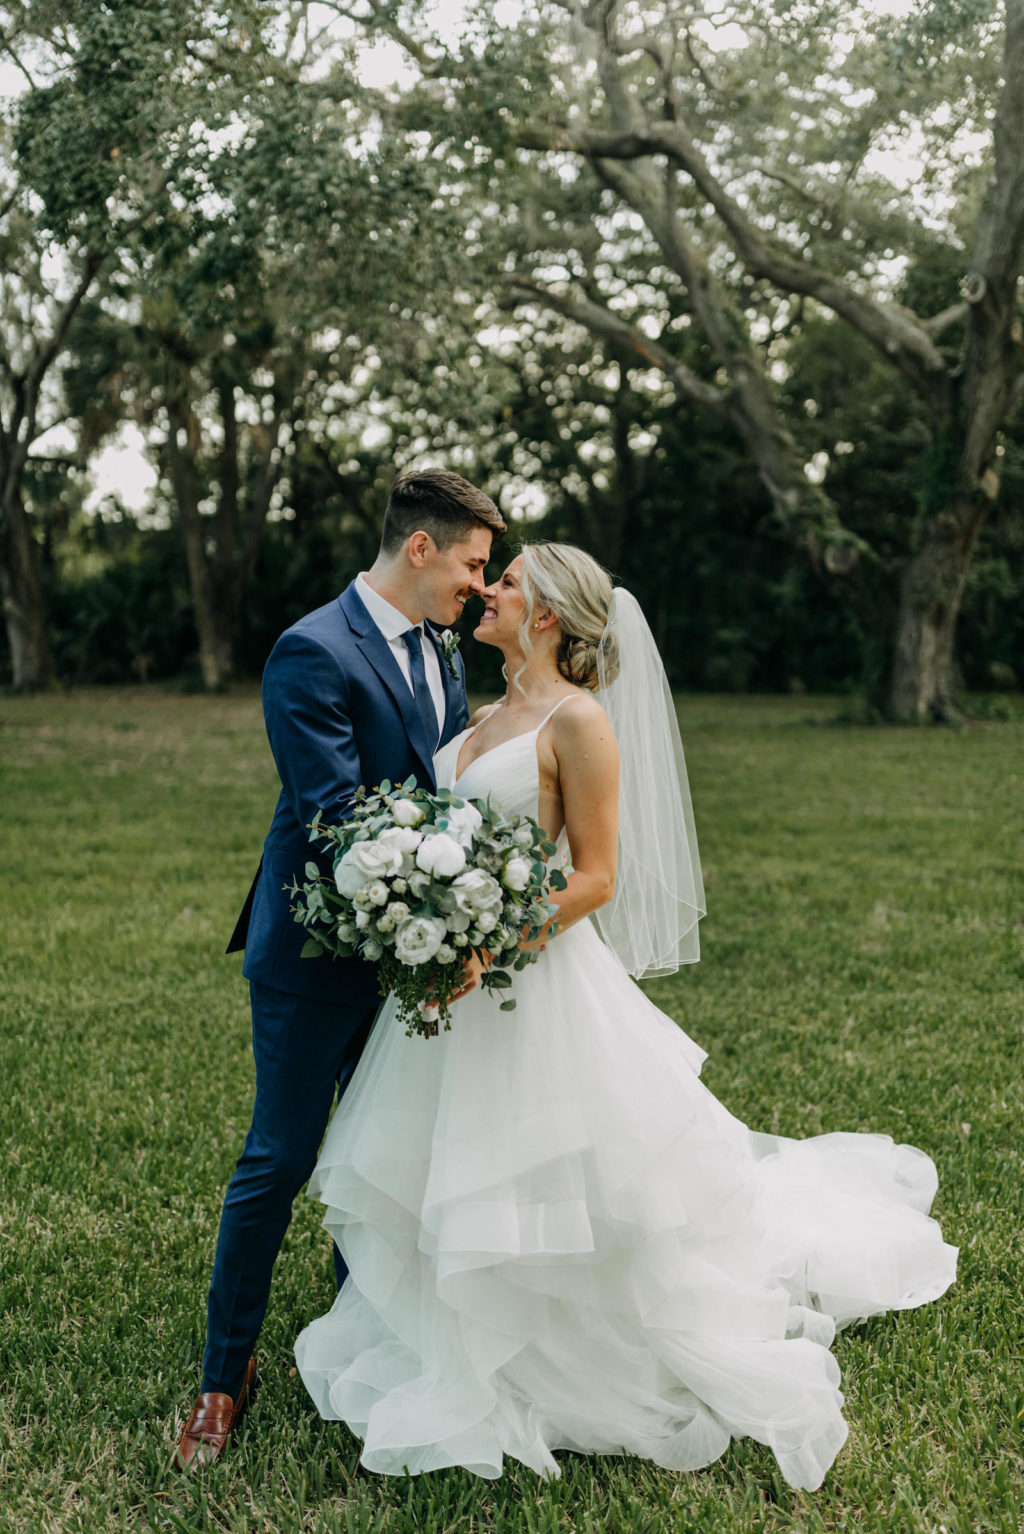 Classic Bride with Hair in Bun in Horsehair Ruffle Skirt V Neckline Wedding Dress Holding White and Greenery Eucalyptus Floral Bouquet Kissing Groom in Blue Suit | Tampa Bay Wedding Photographer Amber McWhorter Photography | Wedding Hair and Makeup Femme Akoi Beauty Studio